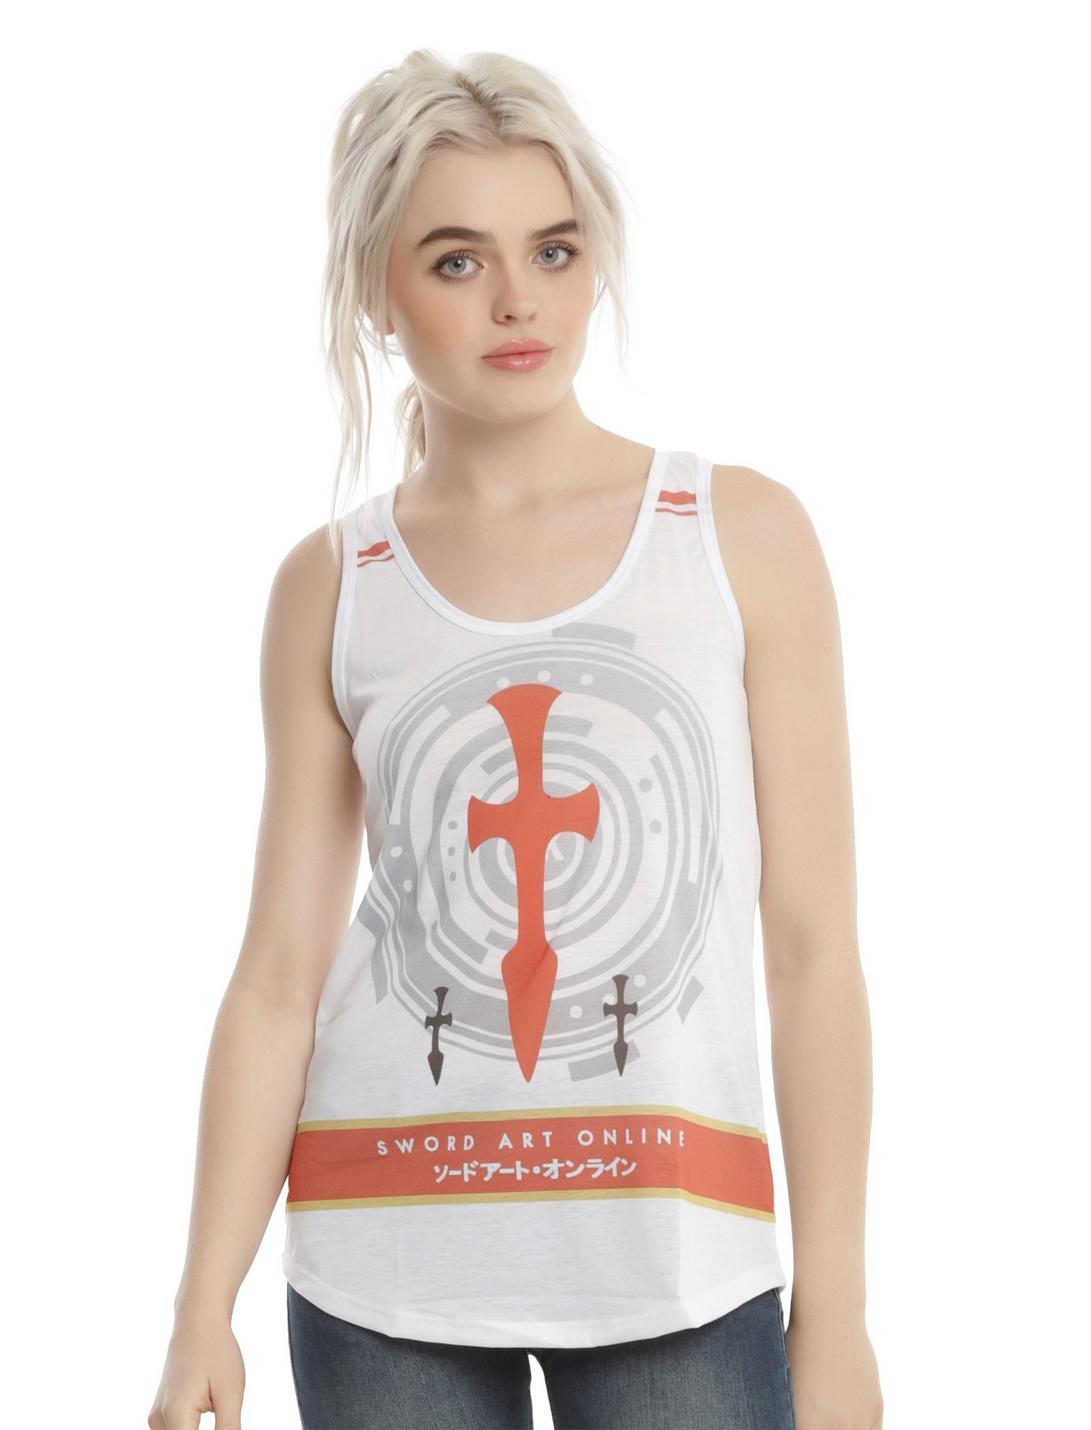 Sword Art Online Knights Of The Blood Girls Tank Top, WHITE, hi-res